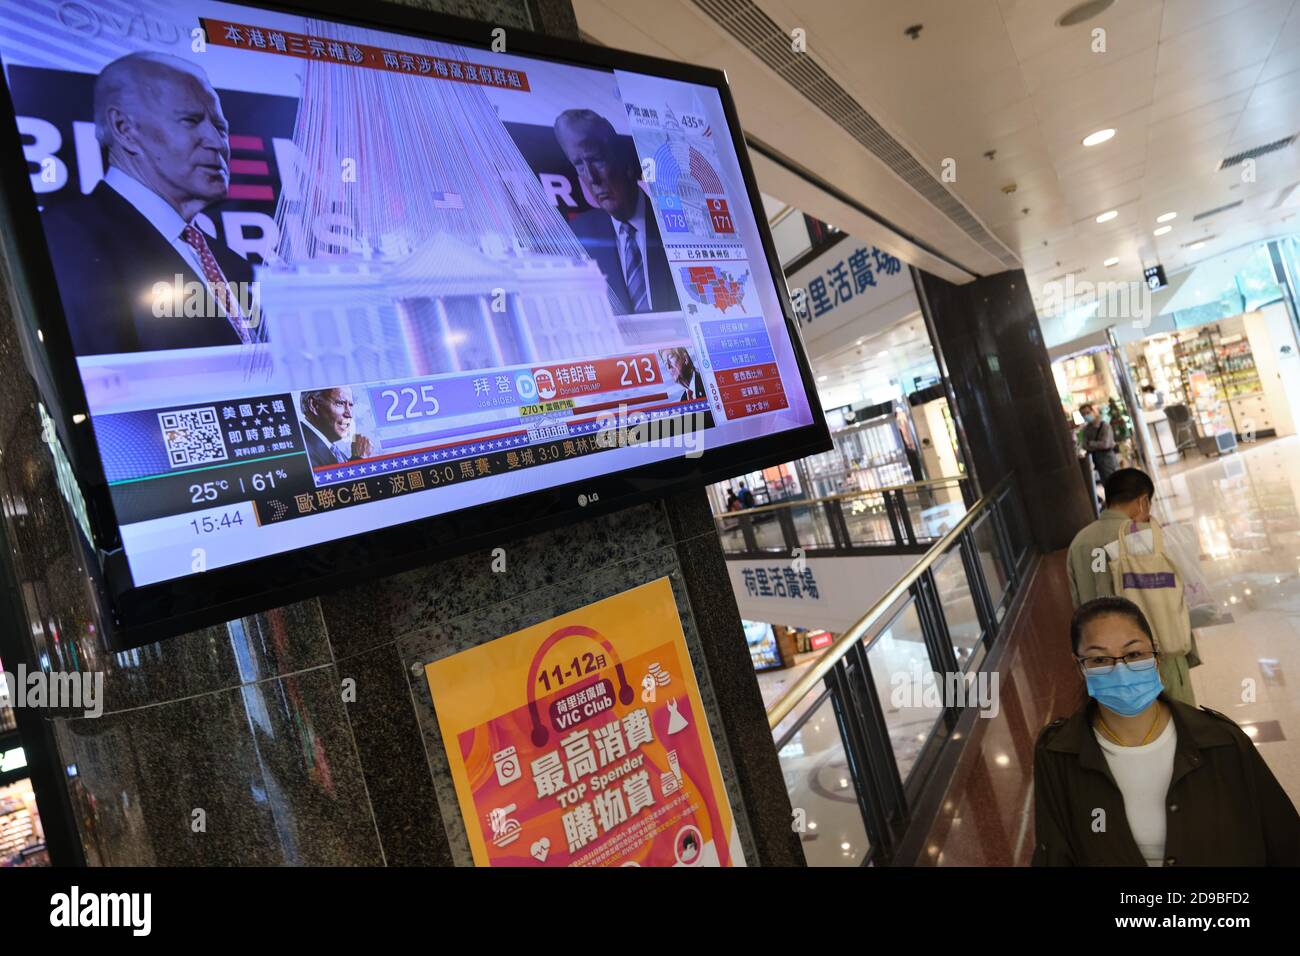 A screen broadcasts the live news report of the US Presidential elections at a shopping mall. Stock Photo